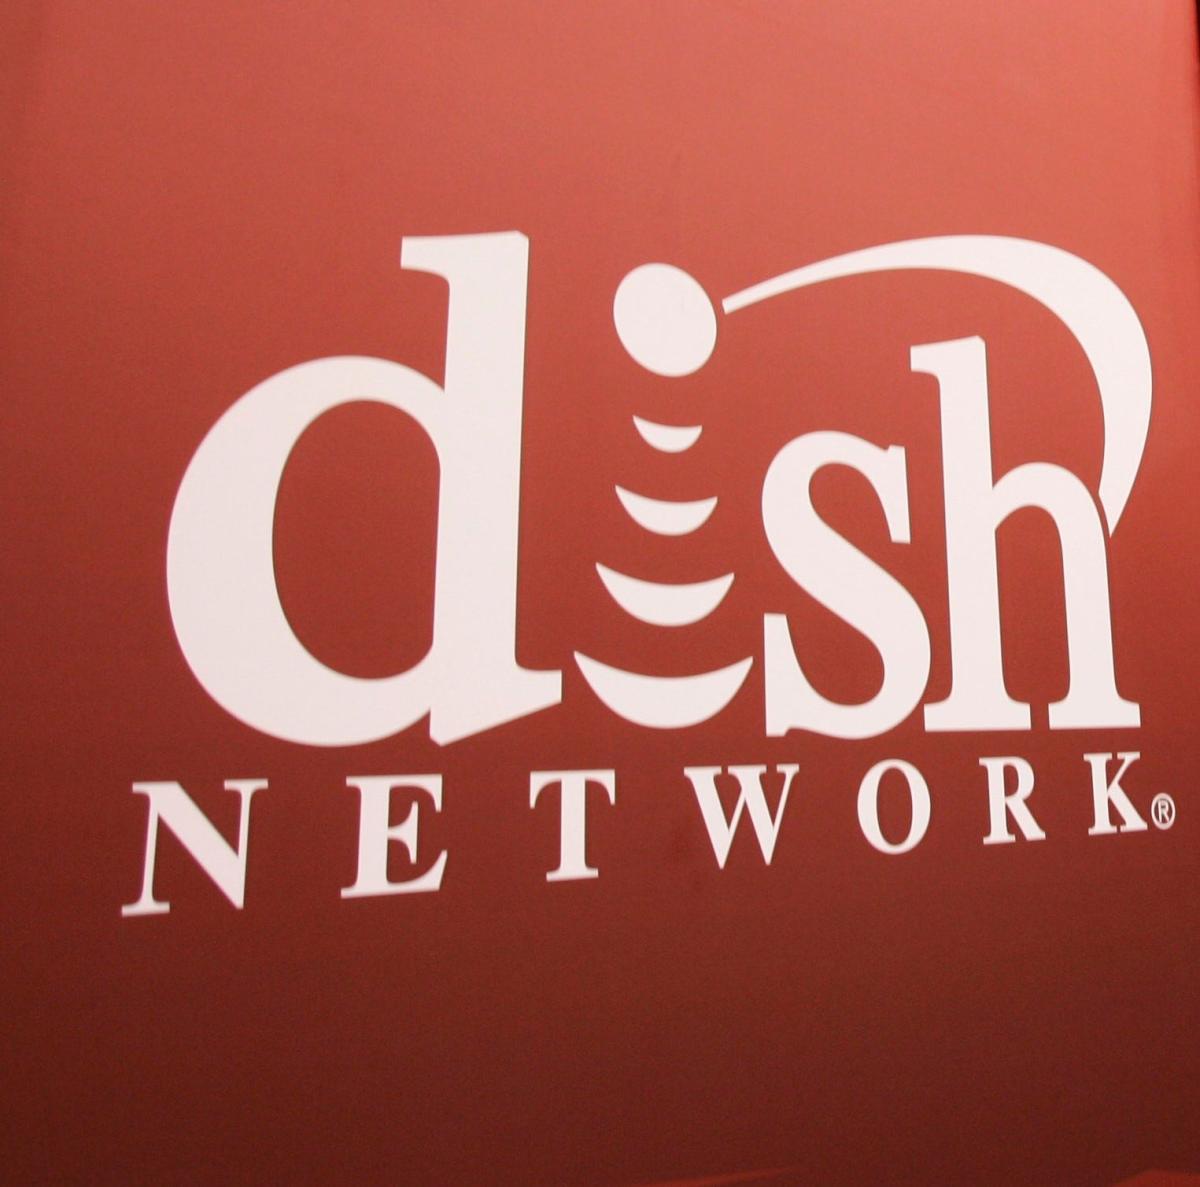 Fox Providence pulled from DISH Network amid contract dispute